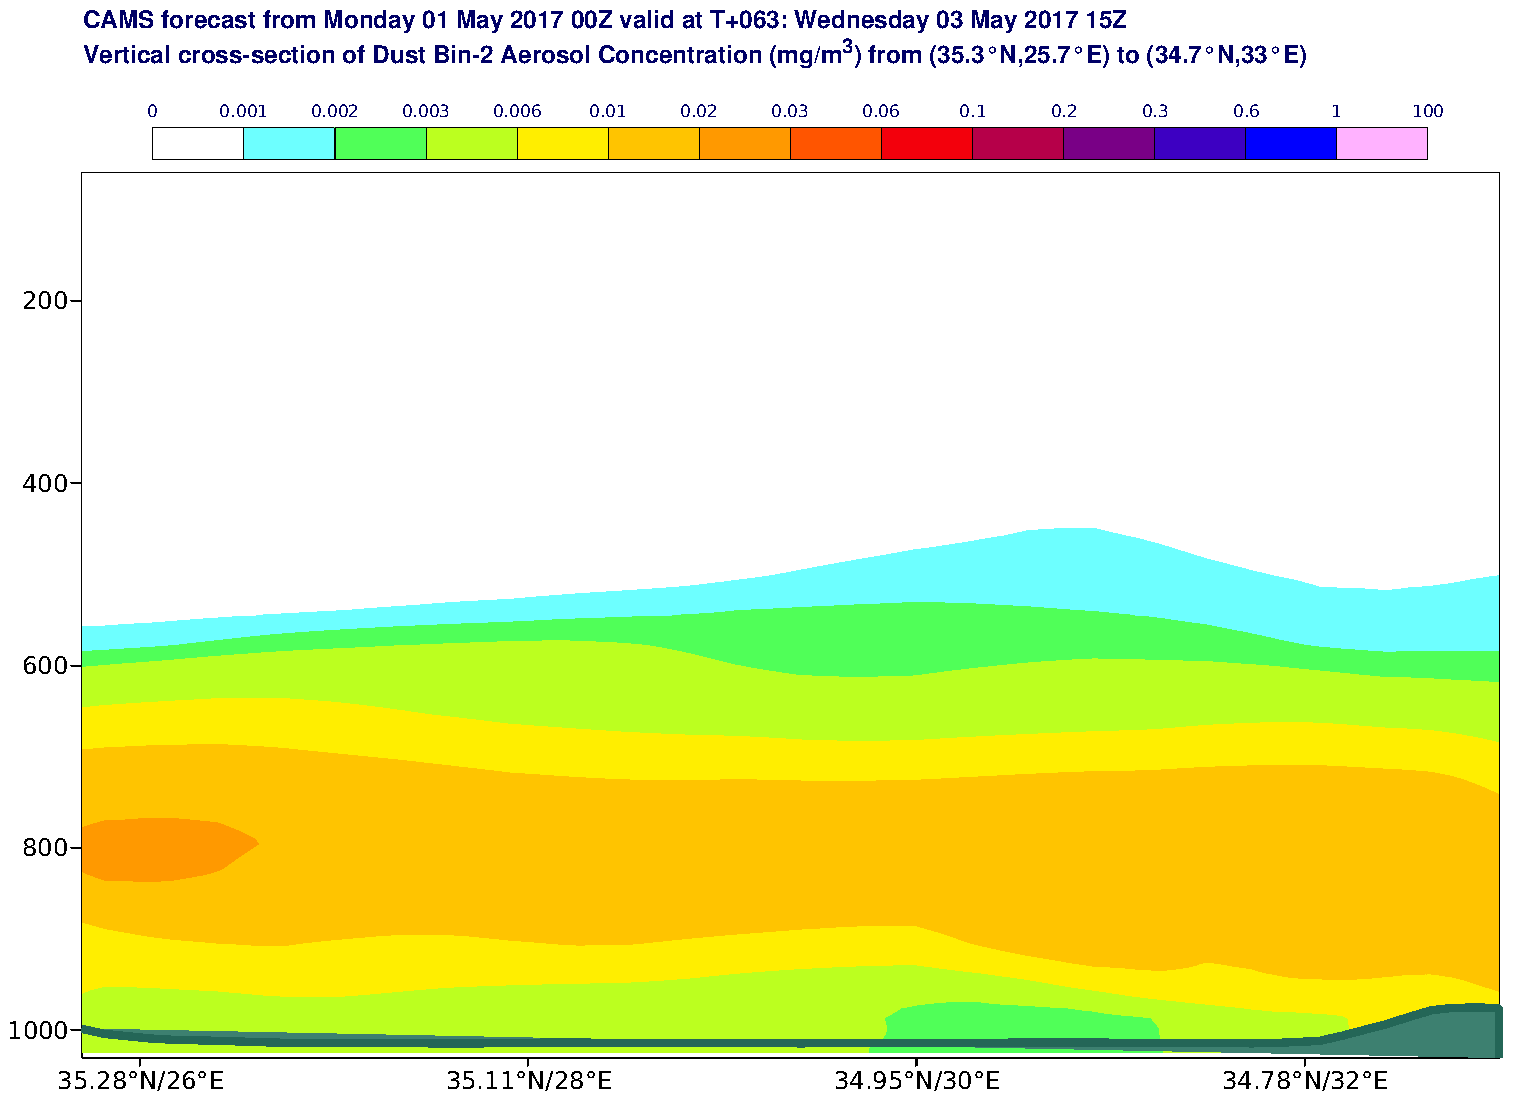 Vertical cross-section of Dust Bin-2 Aerosol Concentration (mg/m3) valid at T63 - 2017-05-03 15:00